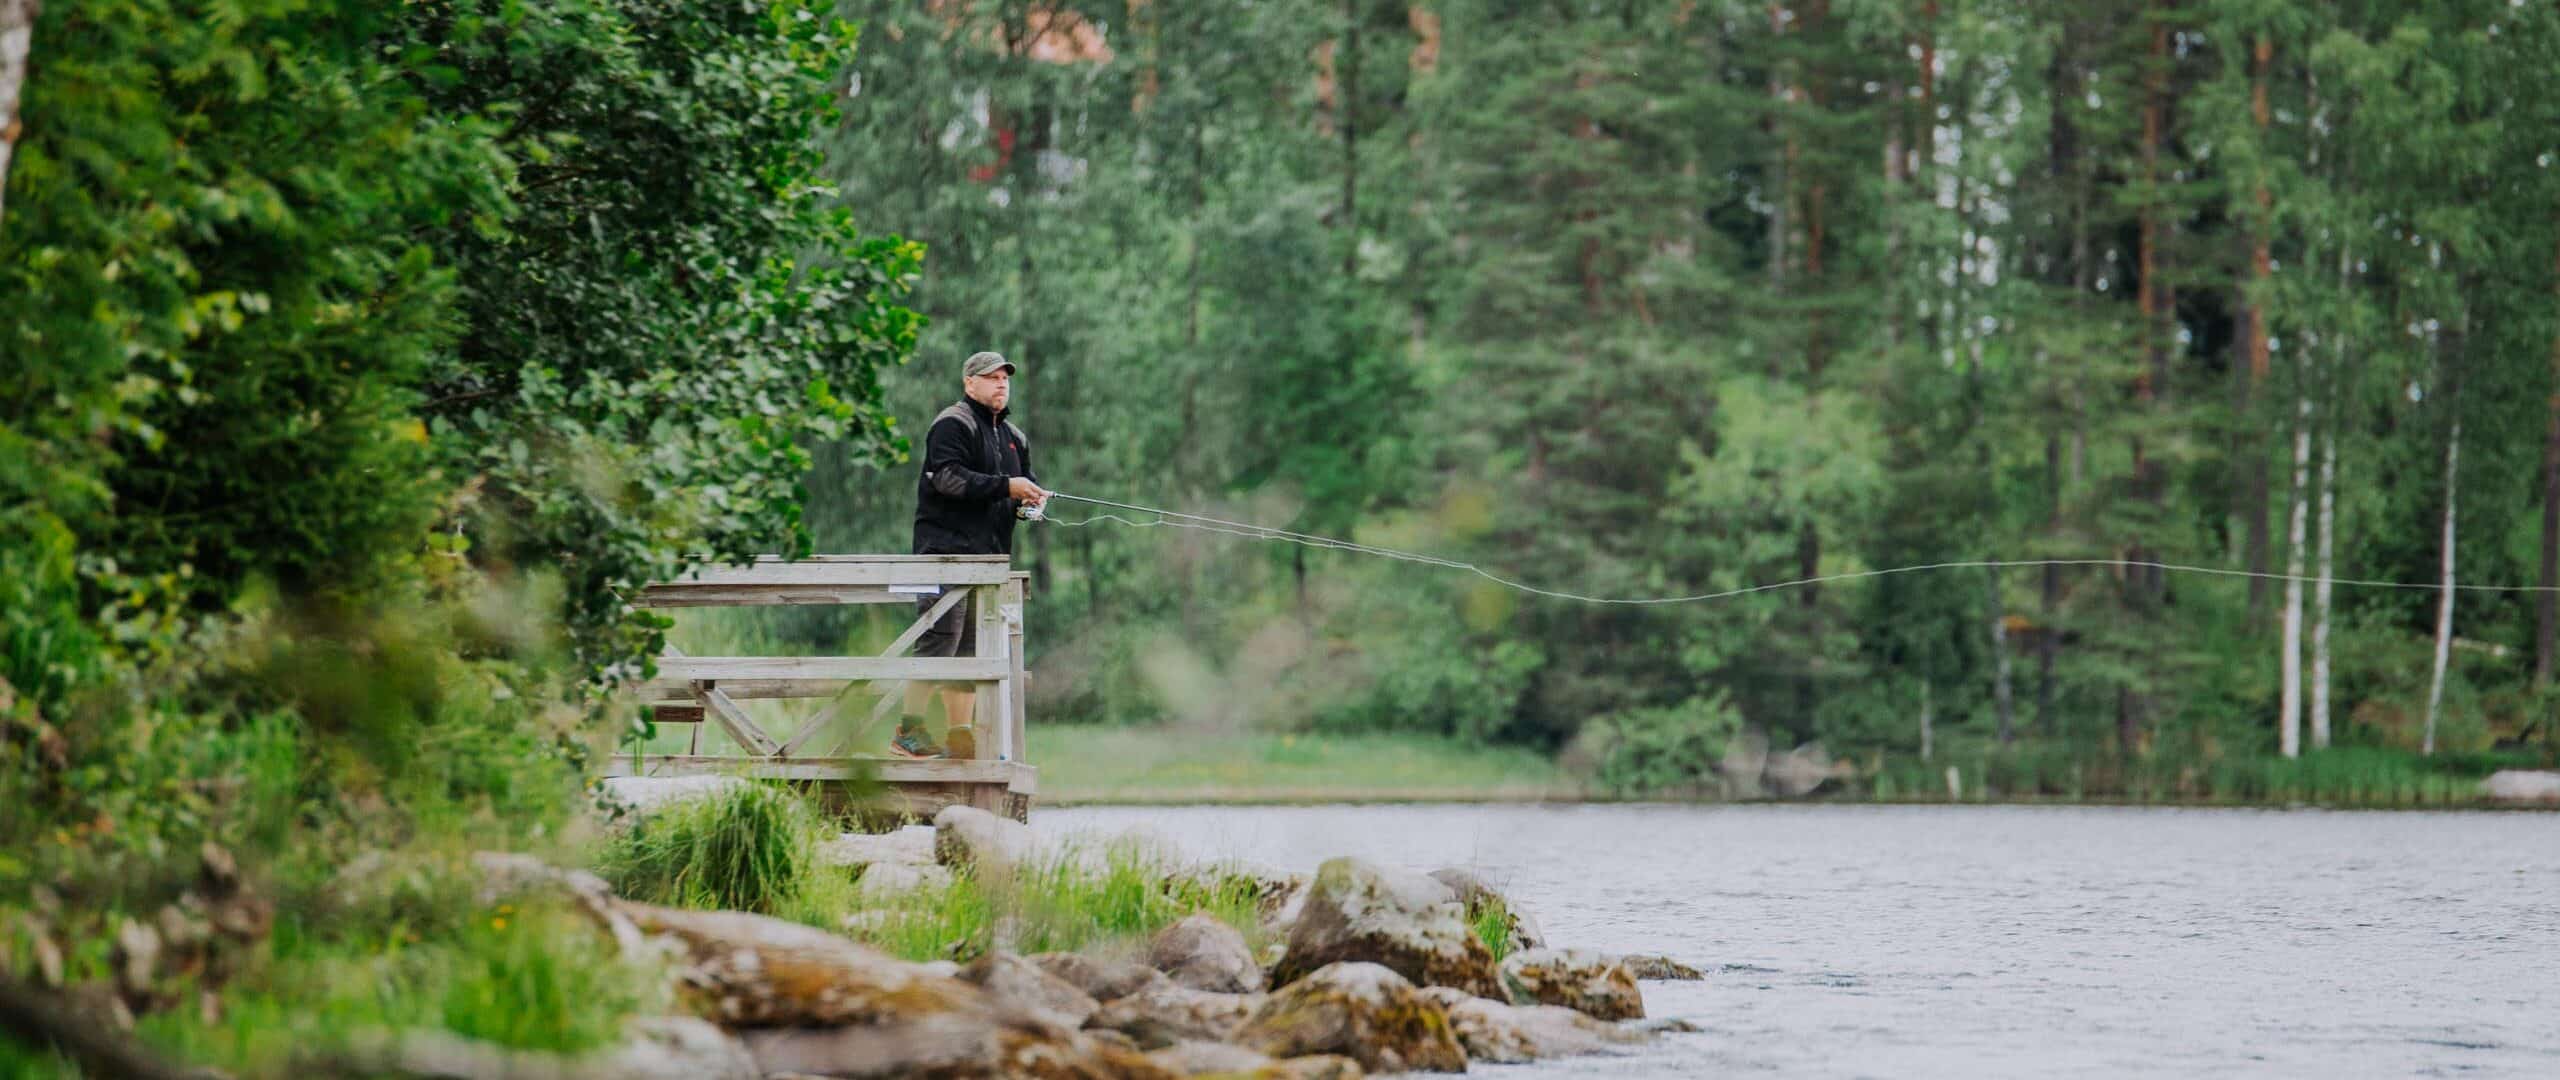 Person fishing from a river while standing on a wooden platform.